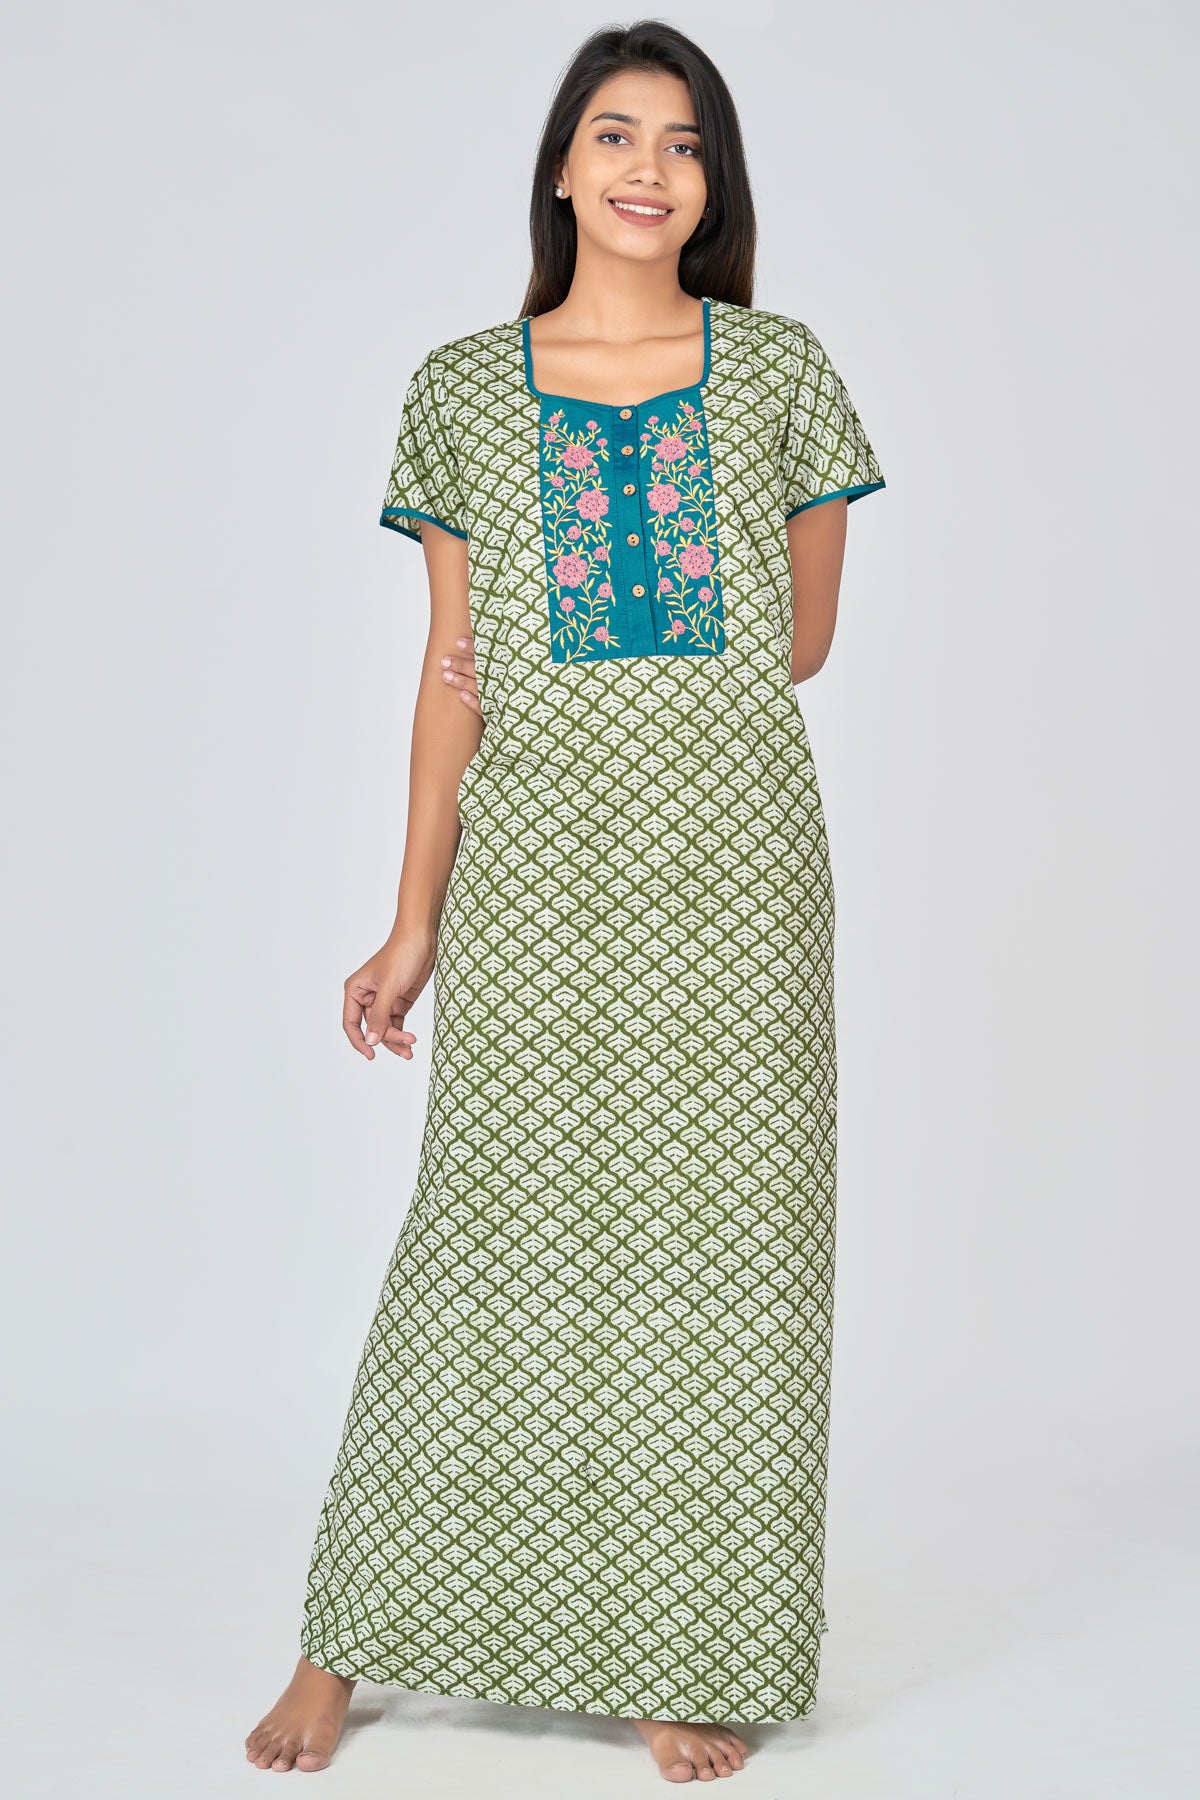 Animated Leaf printed & Floral embroidered Women's Nighty - Green 